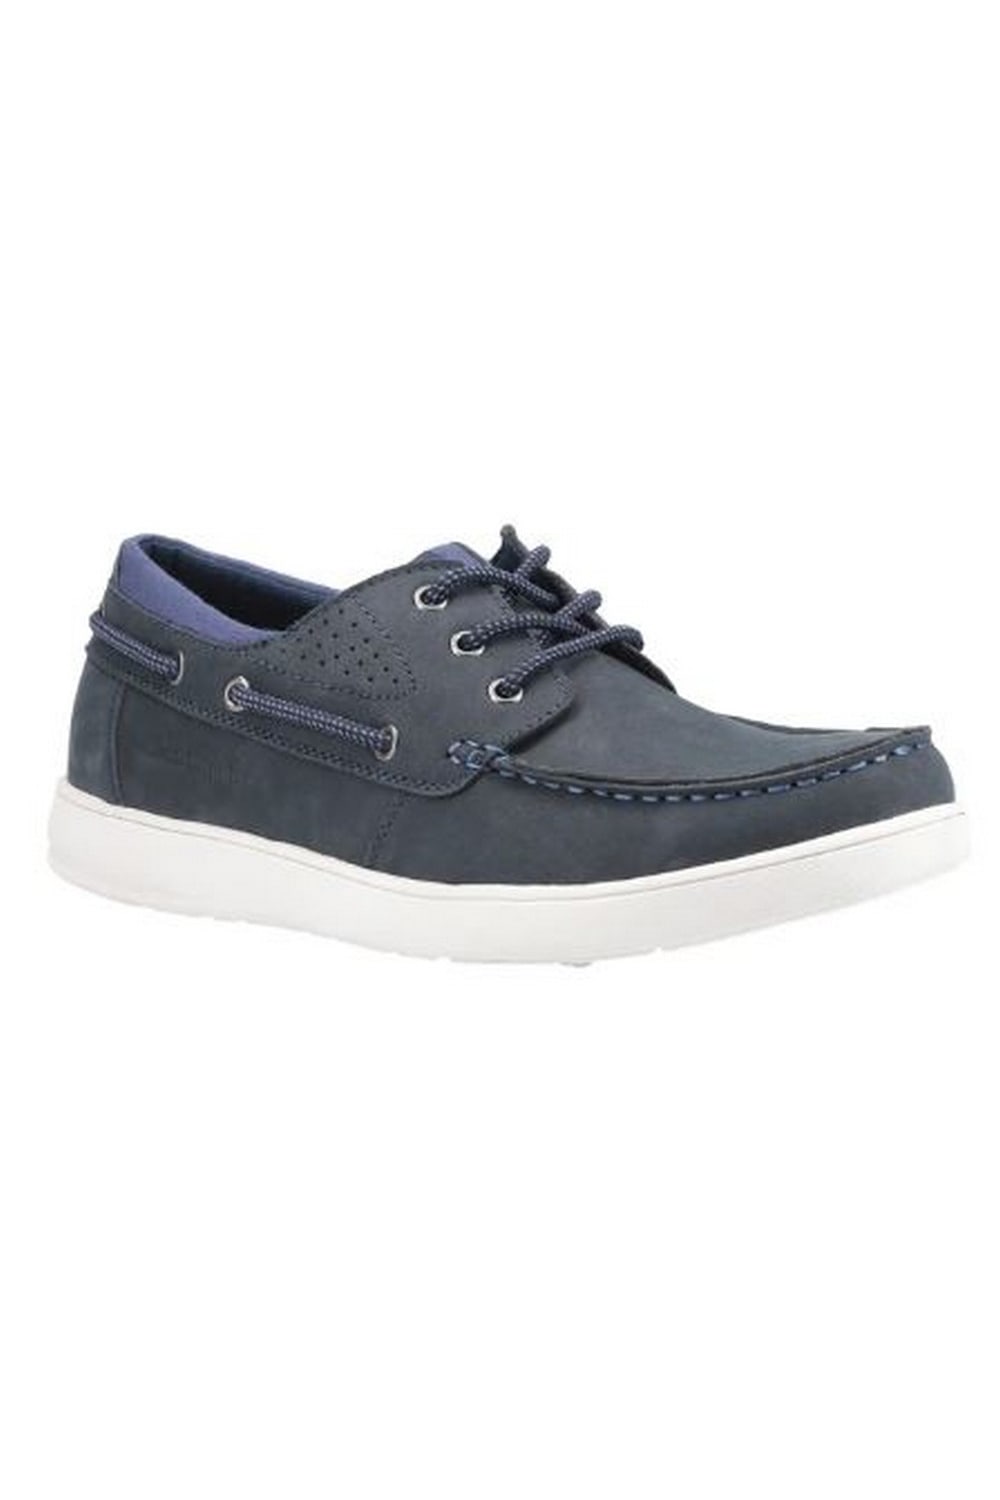 Hush Puppies Mens Liam Lace Up Leather Boat Shoe